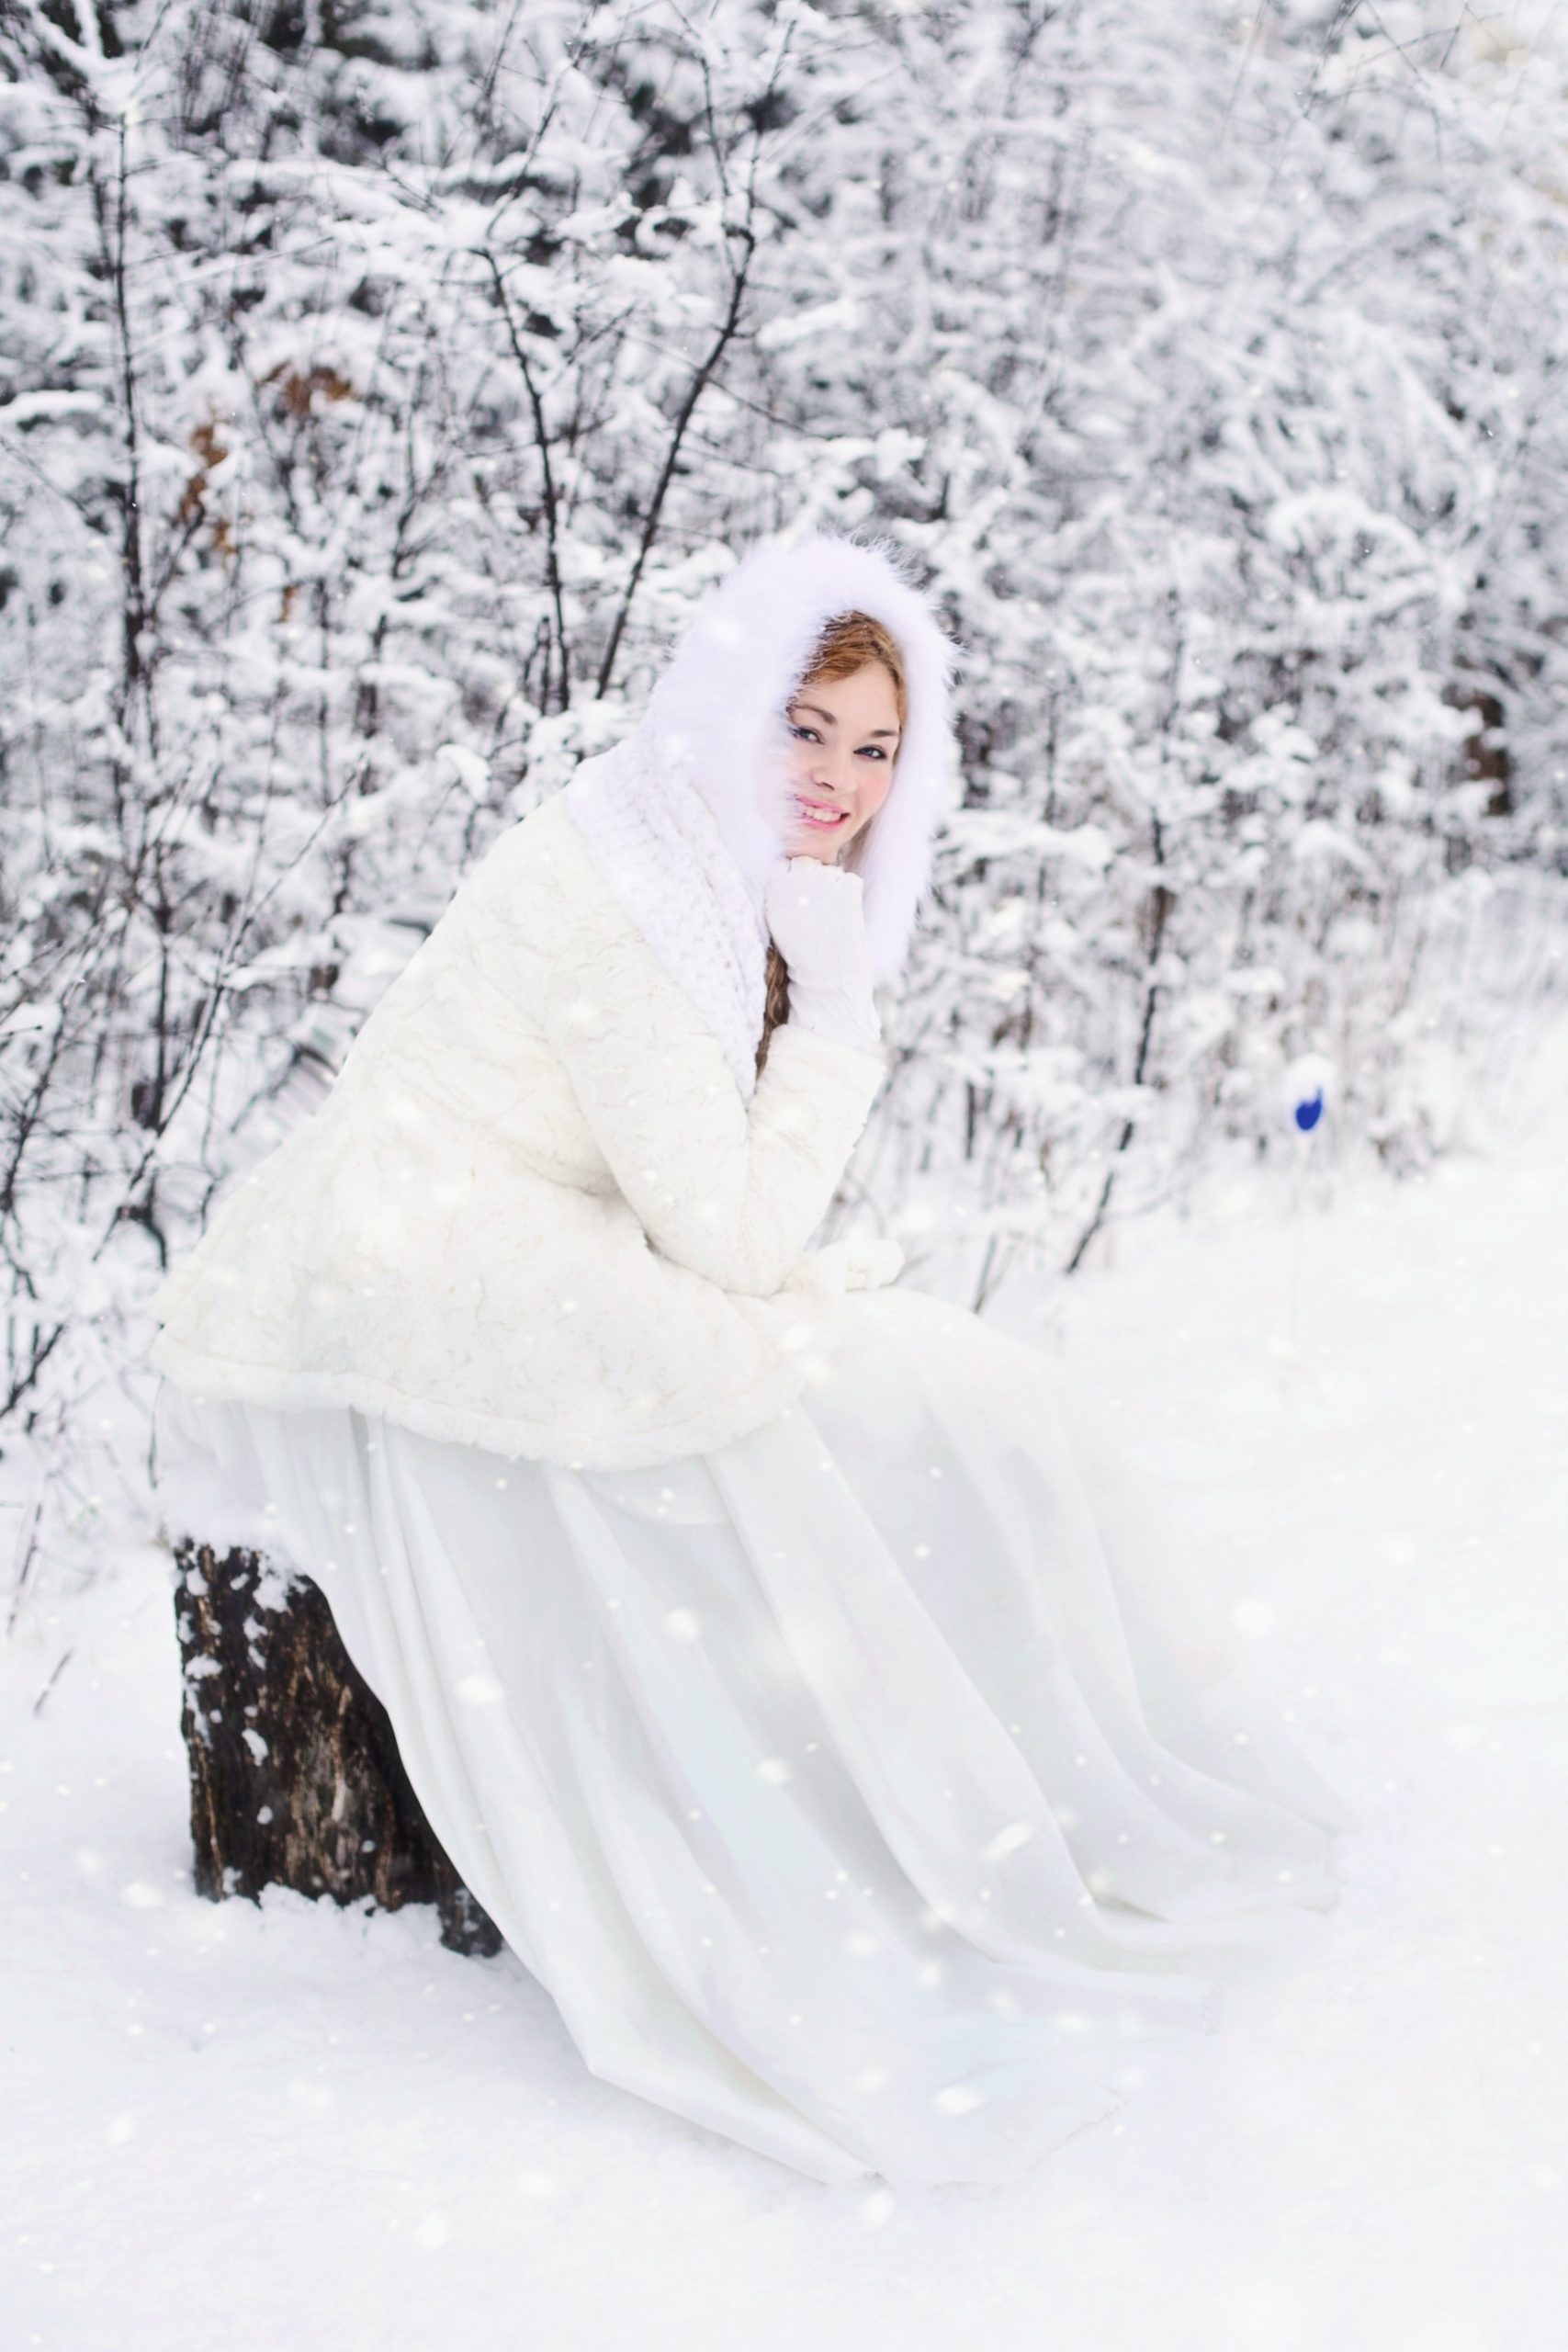 10 Spectacular Ideas For The Most Magical Winter Wedding